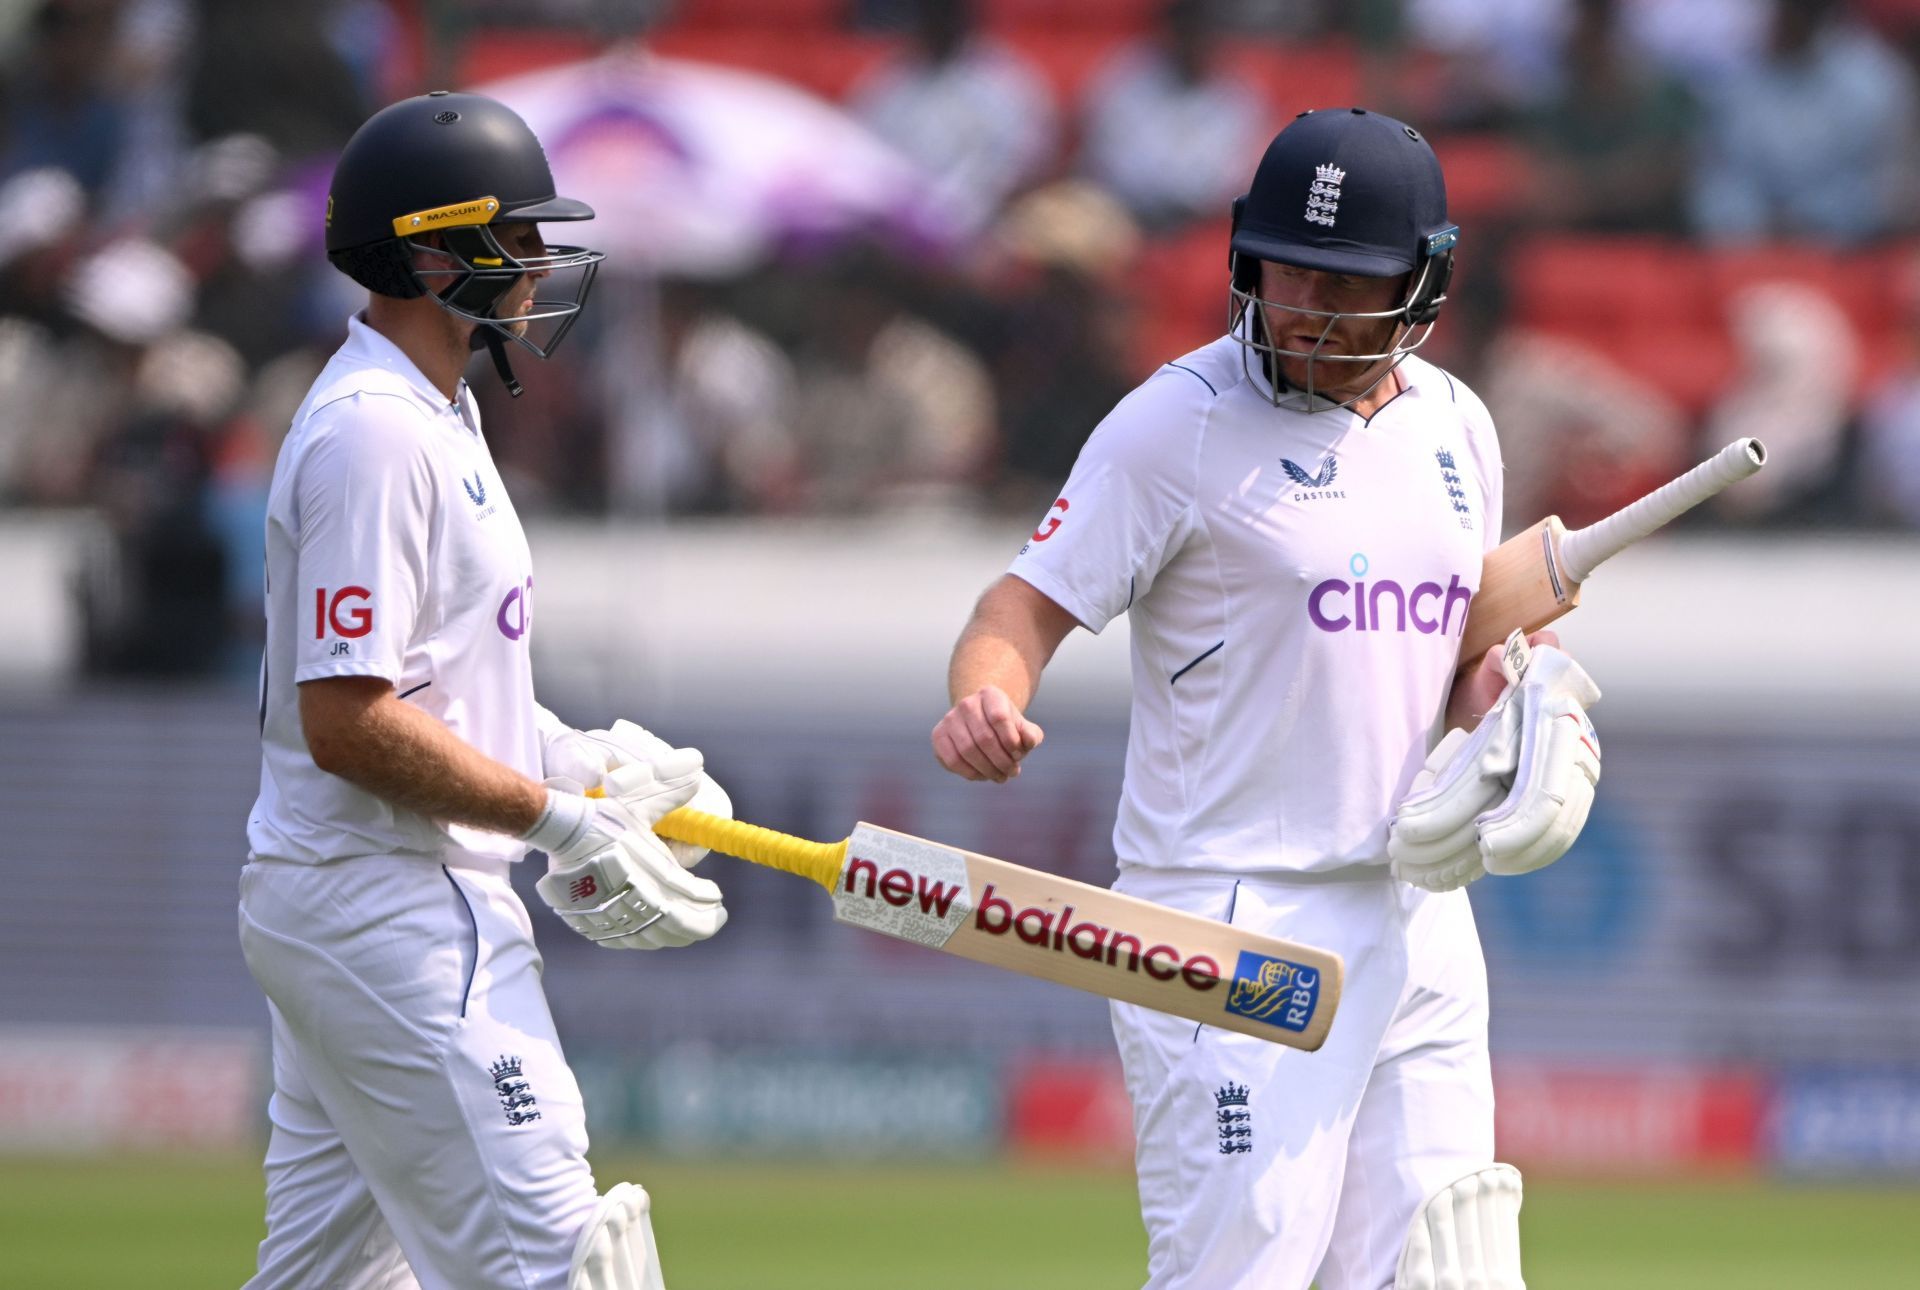 Joe Root and Jonny Bairstow put on a partnership after India took three quick wickets.